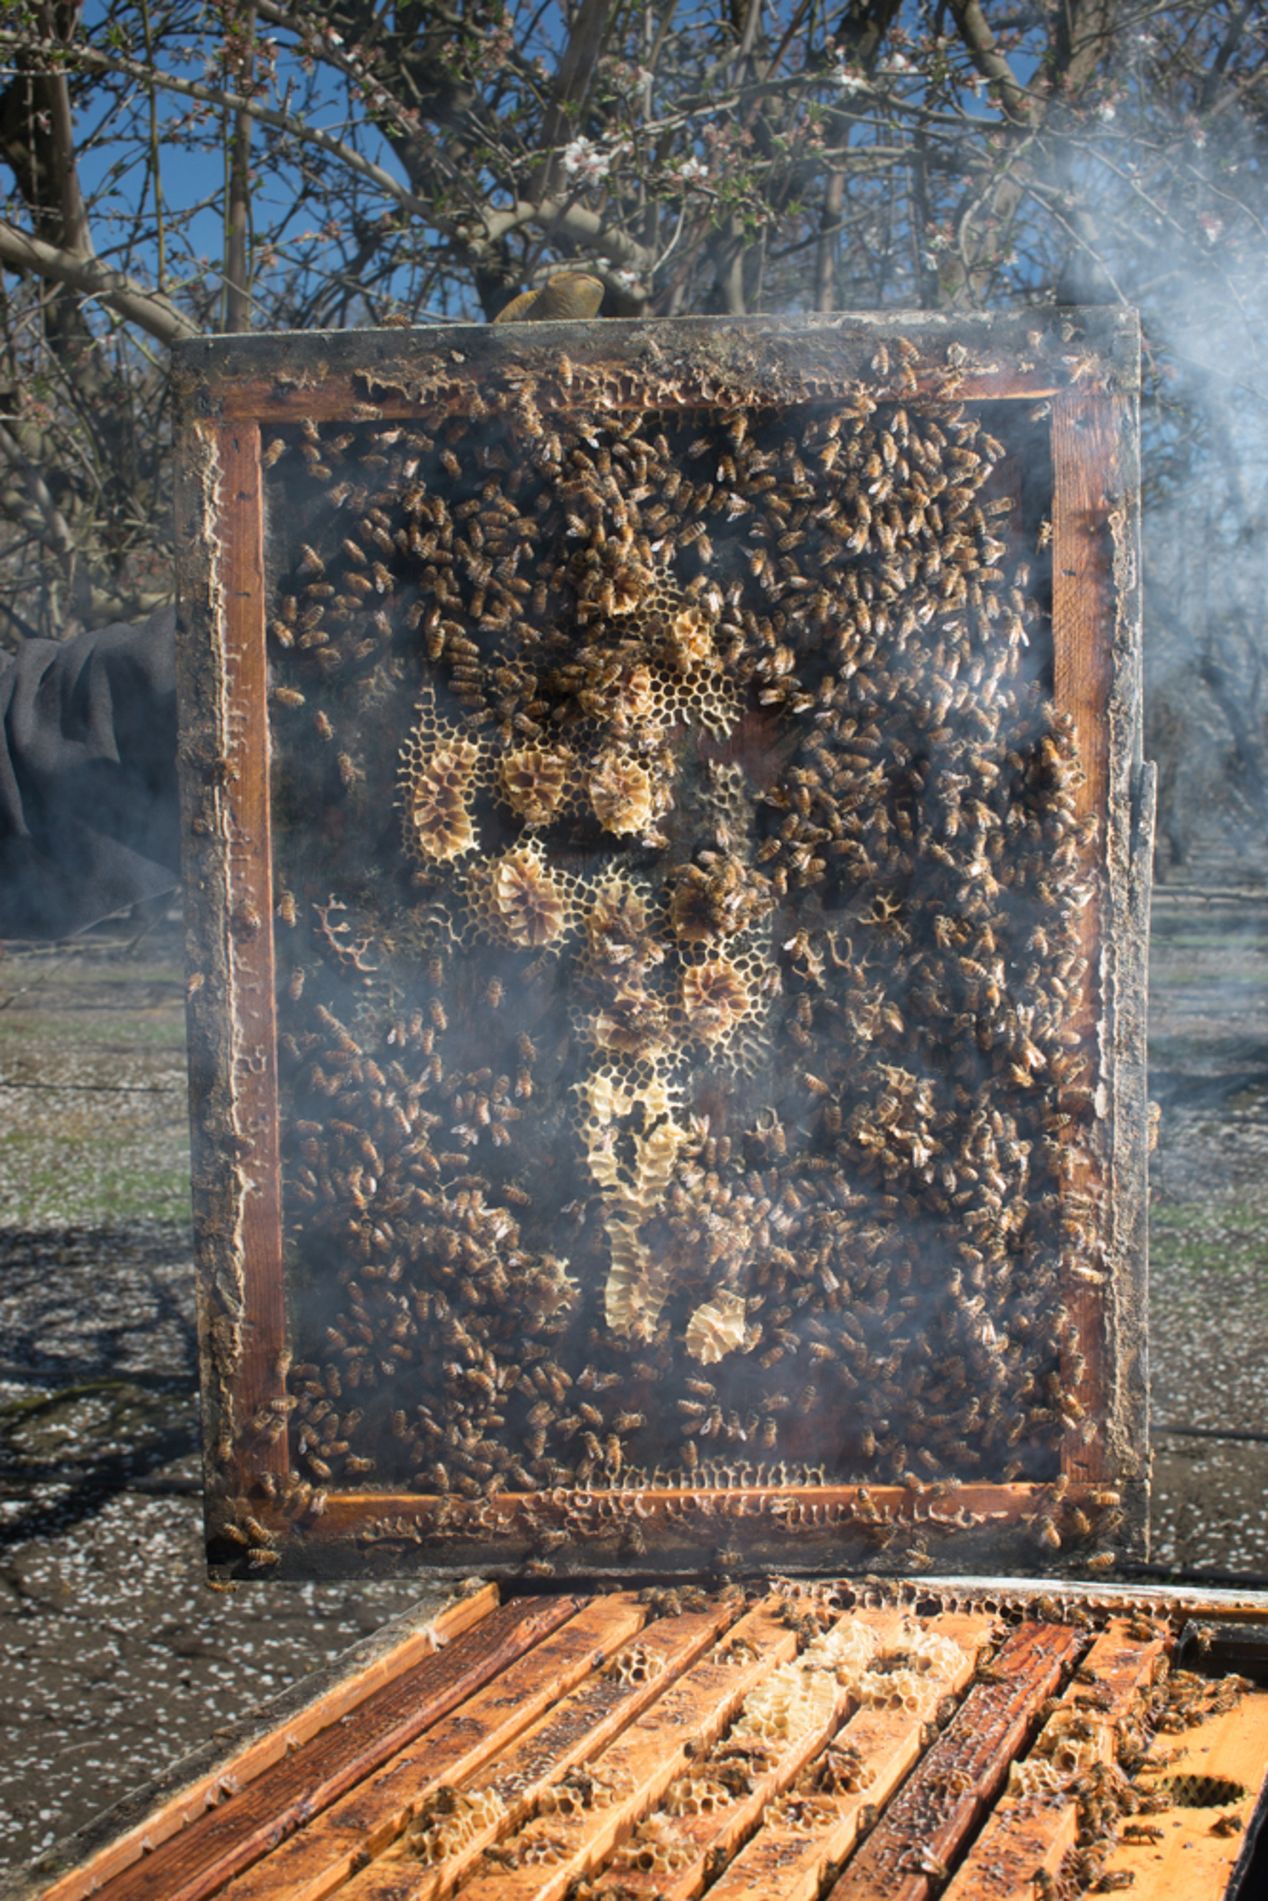 Bees in a beehive in Central Valley, California, Ilona Szwarc, Los Angeles lifestyle photographer. . 